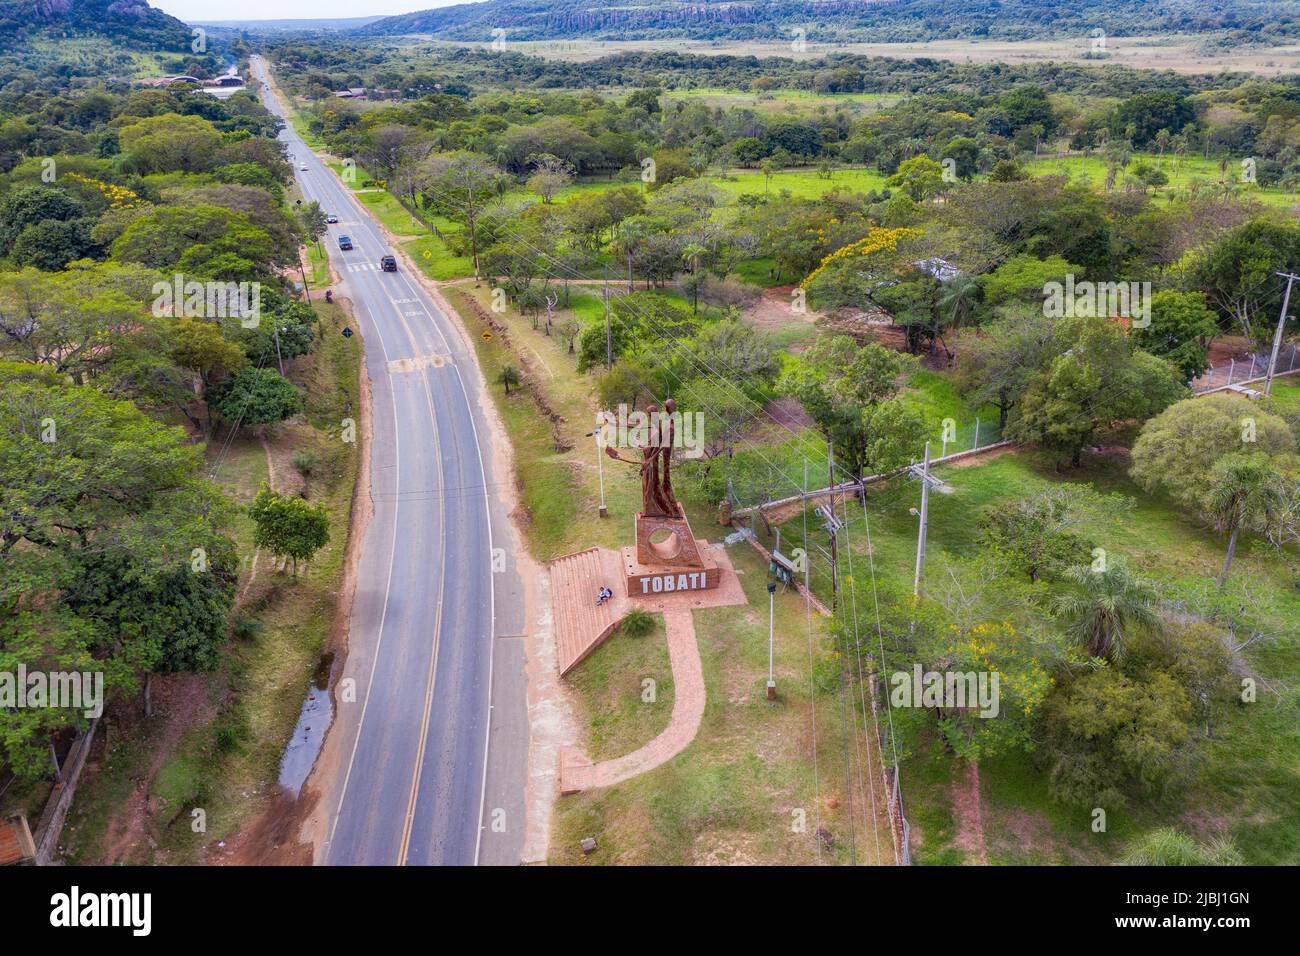 Tobati, Cordillera, Paraguay - May 09, 2022: Aerial view of the entrance of the town of Tobati when entering the town from the south. Stock Photo